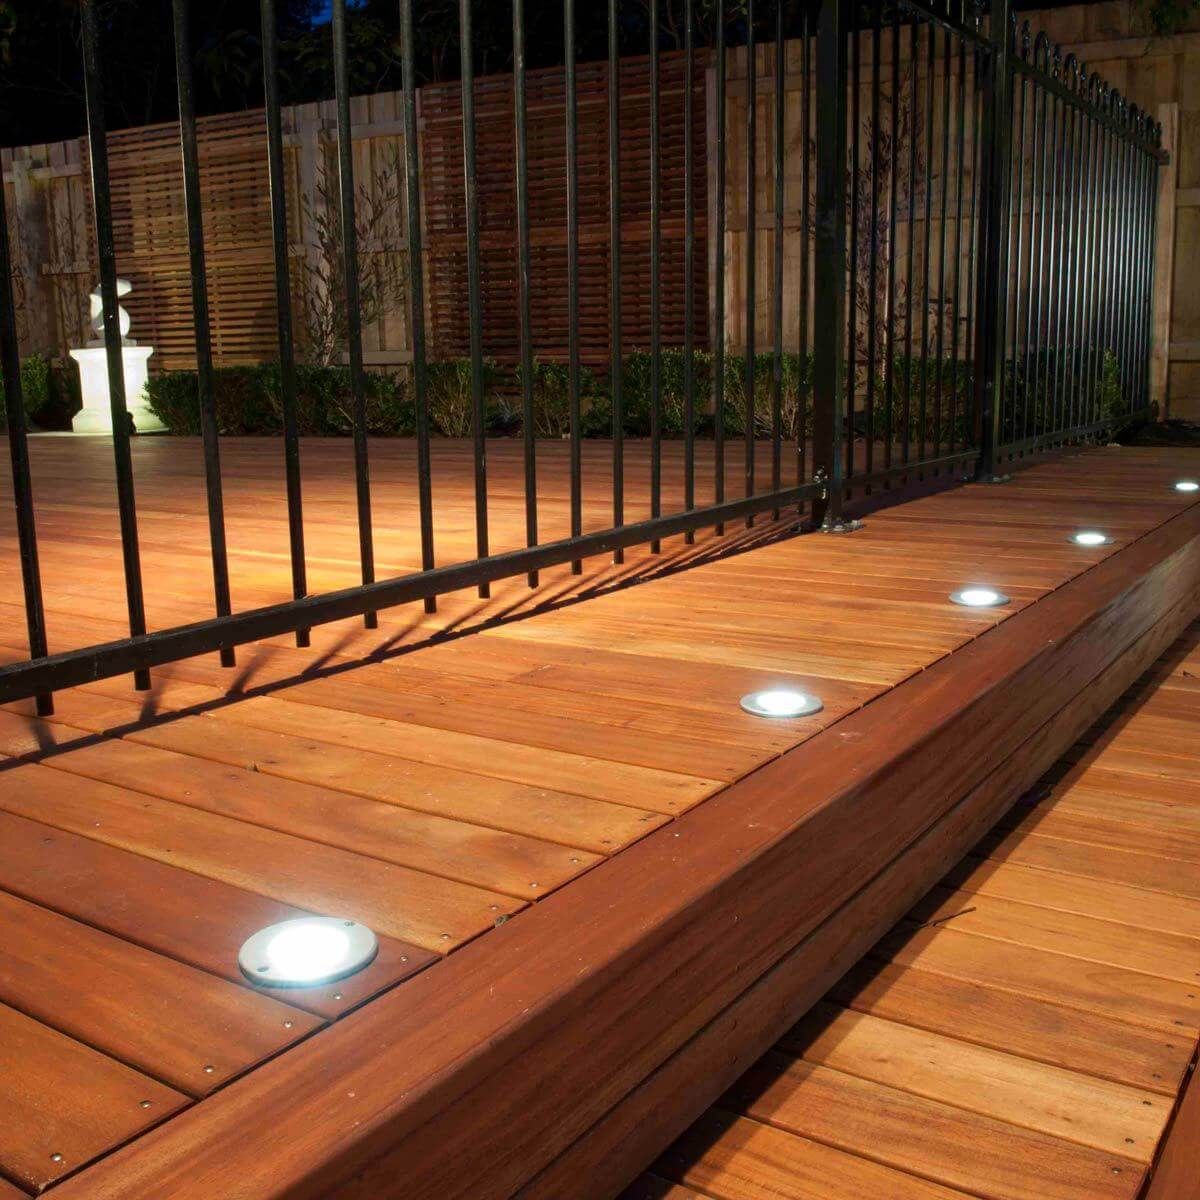 Upgrade Your Outdoor Space with Stylish Decking Materials